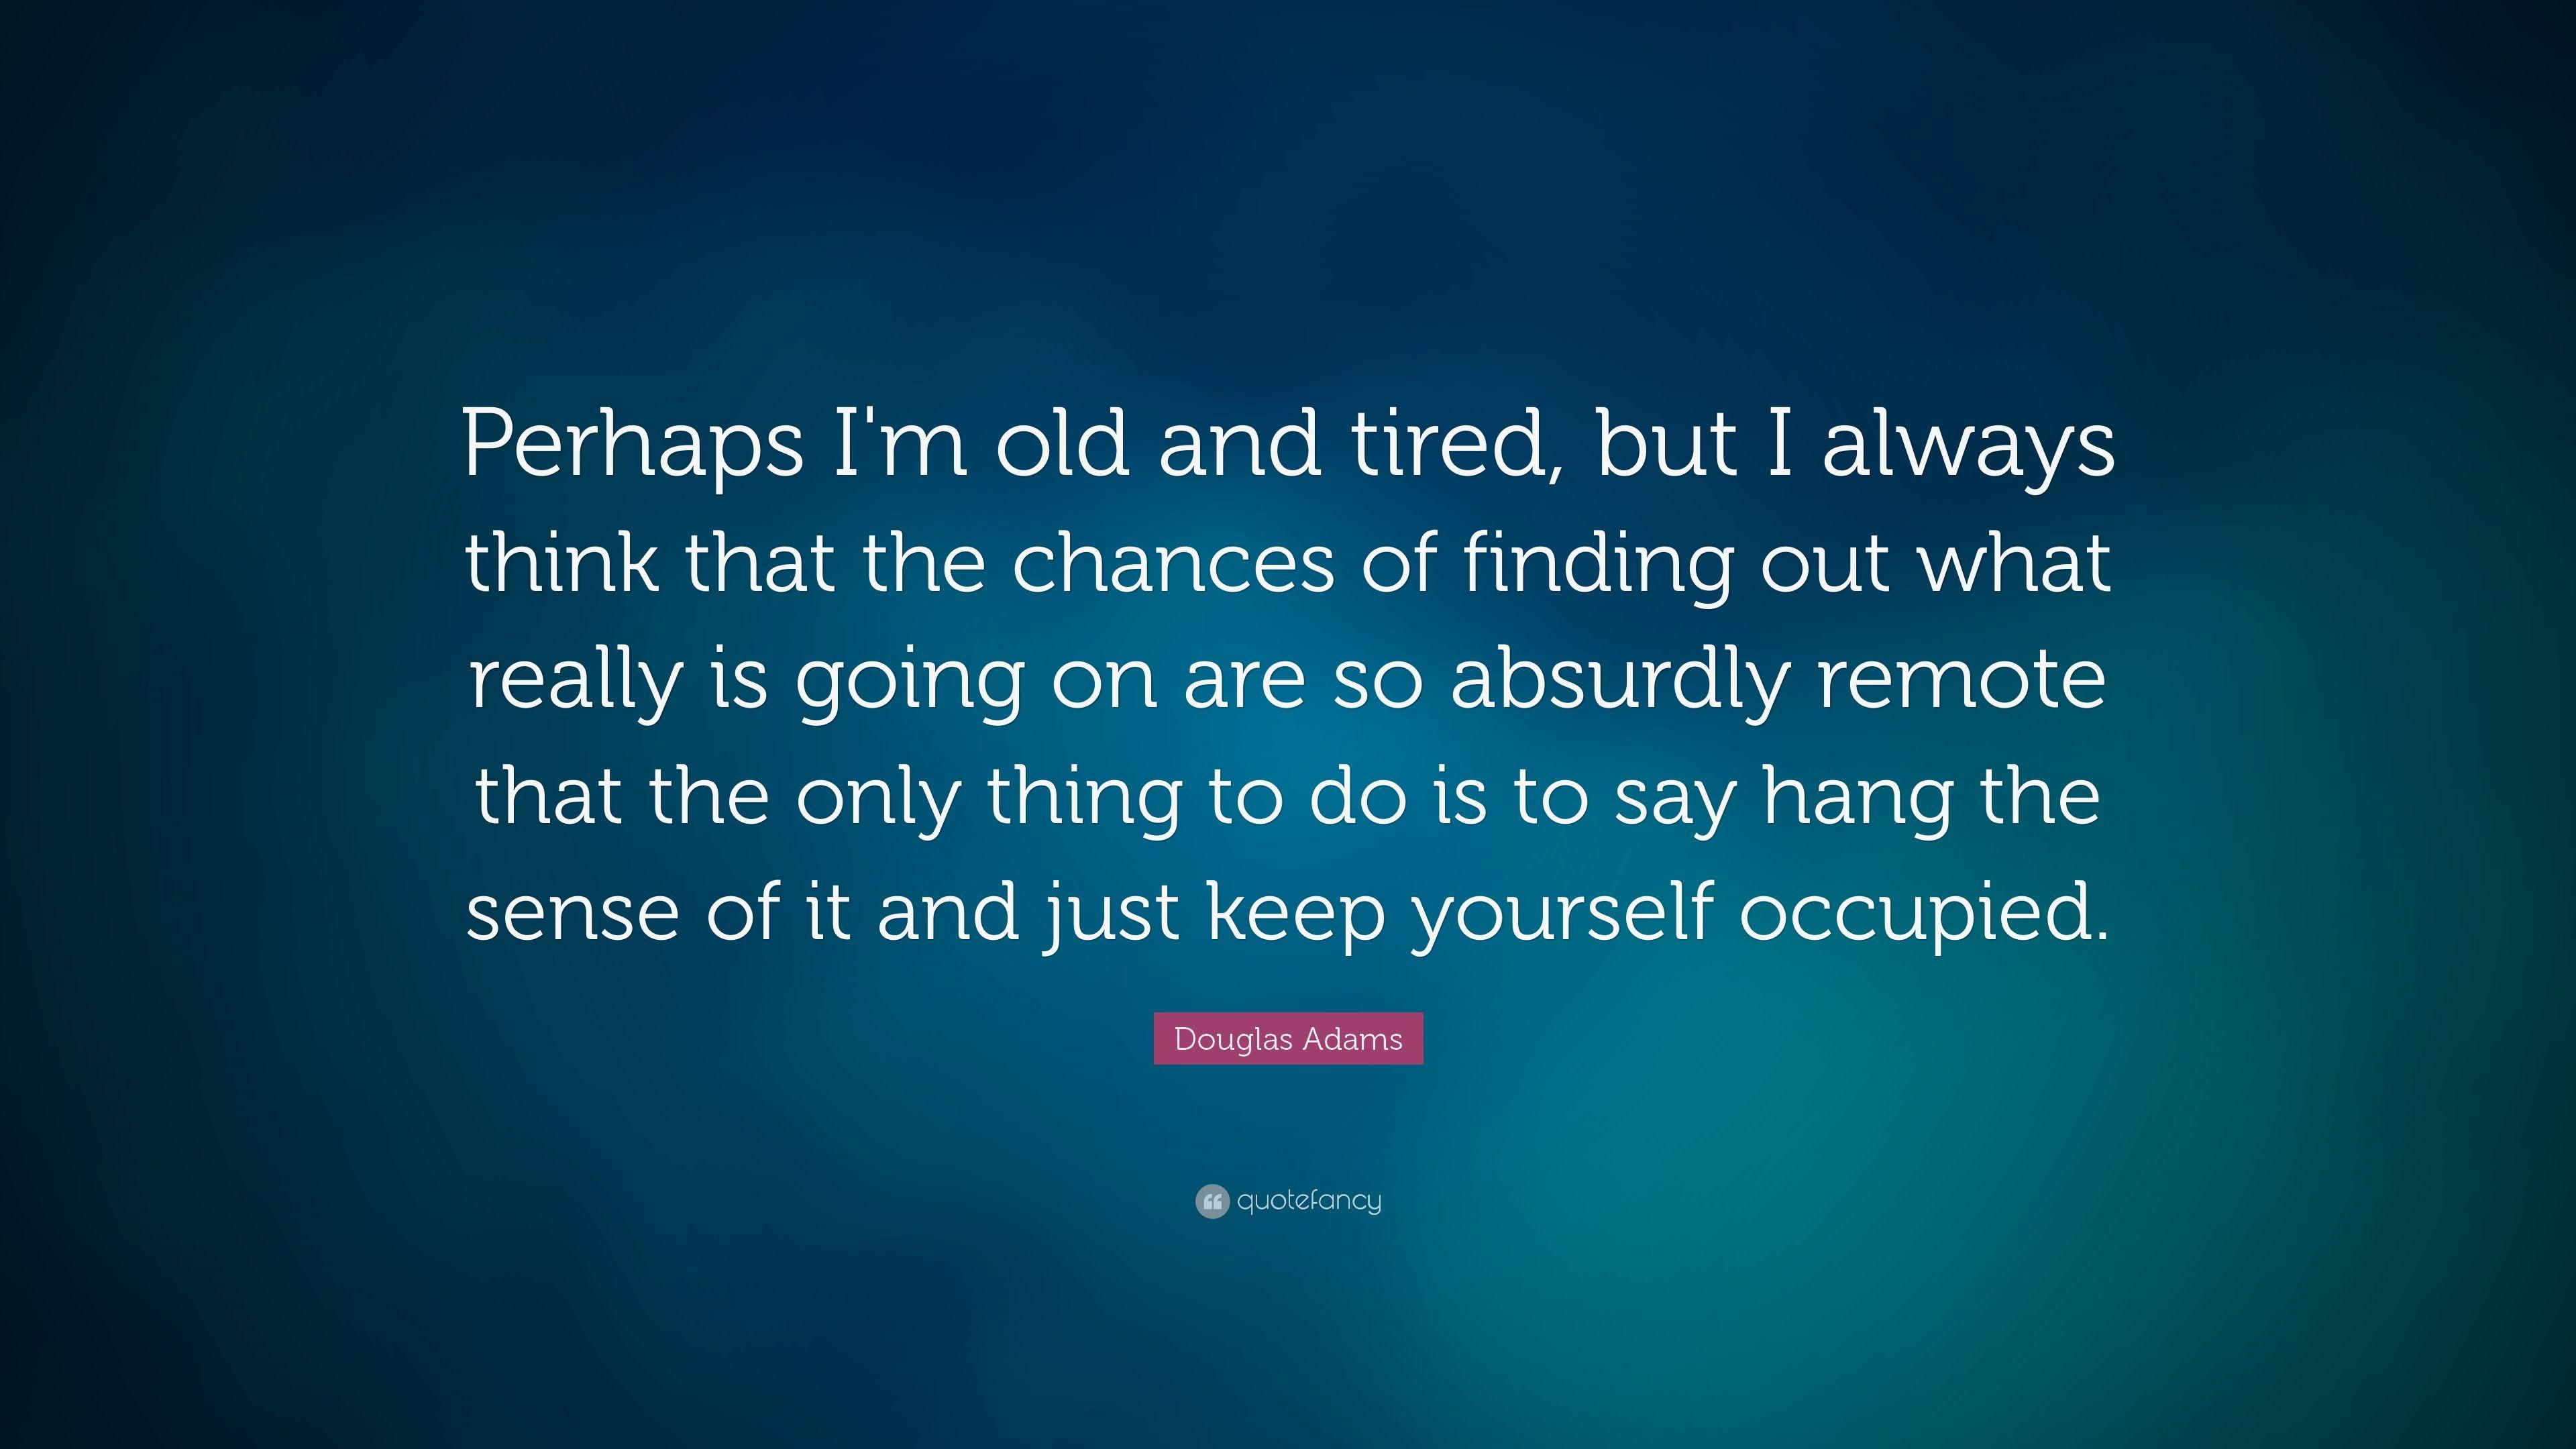 Douglas Adams Quote: “Perhaps I'm old and tired, but I always